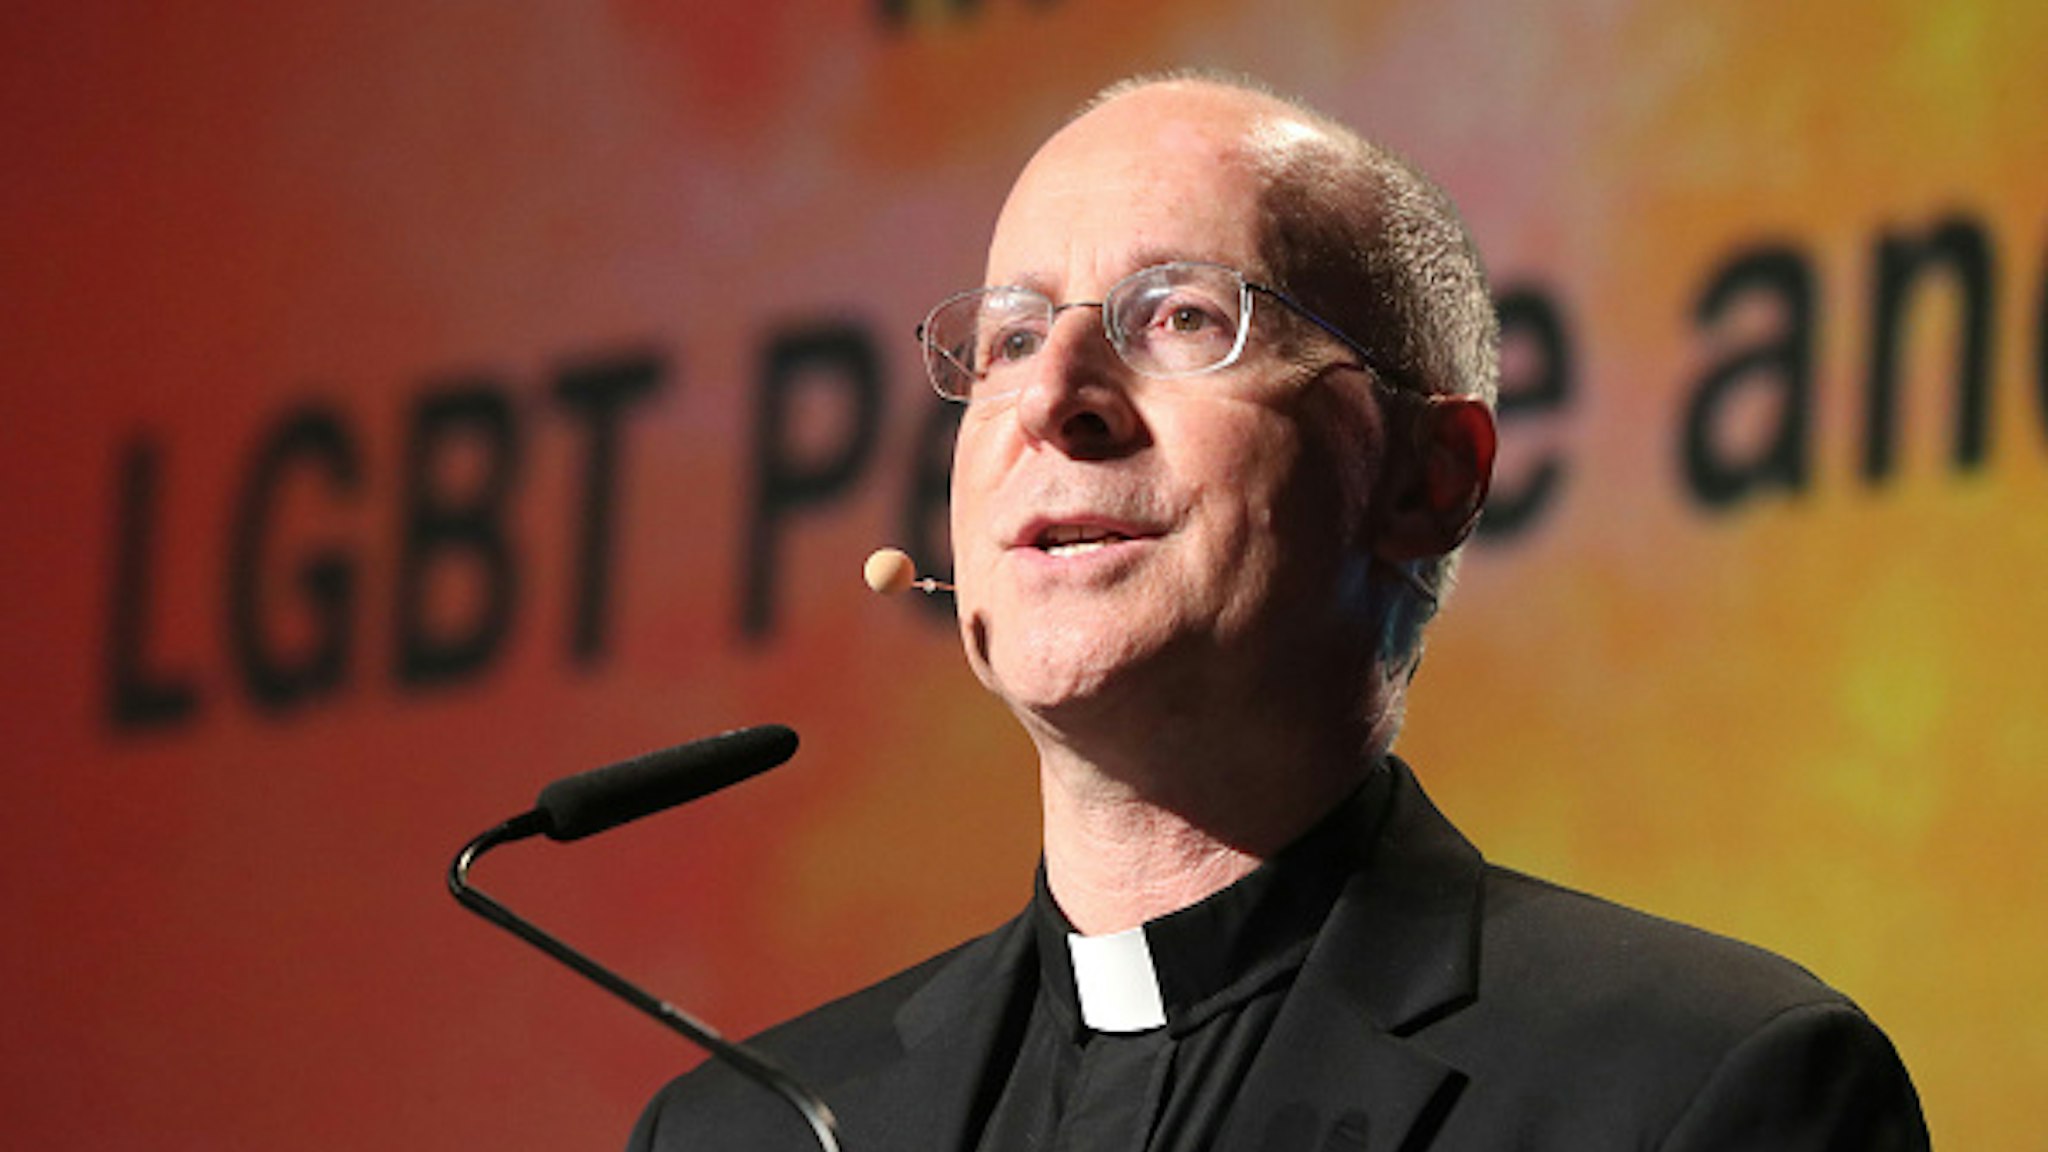 US priest Father James Martin speaking at the world meeting of families in Dublin, on how the Catholic Church can welcome members of the LGBT community.